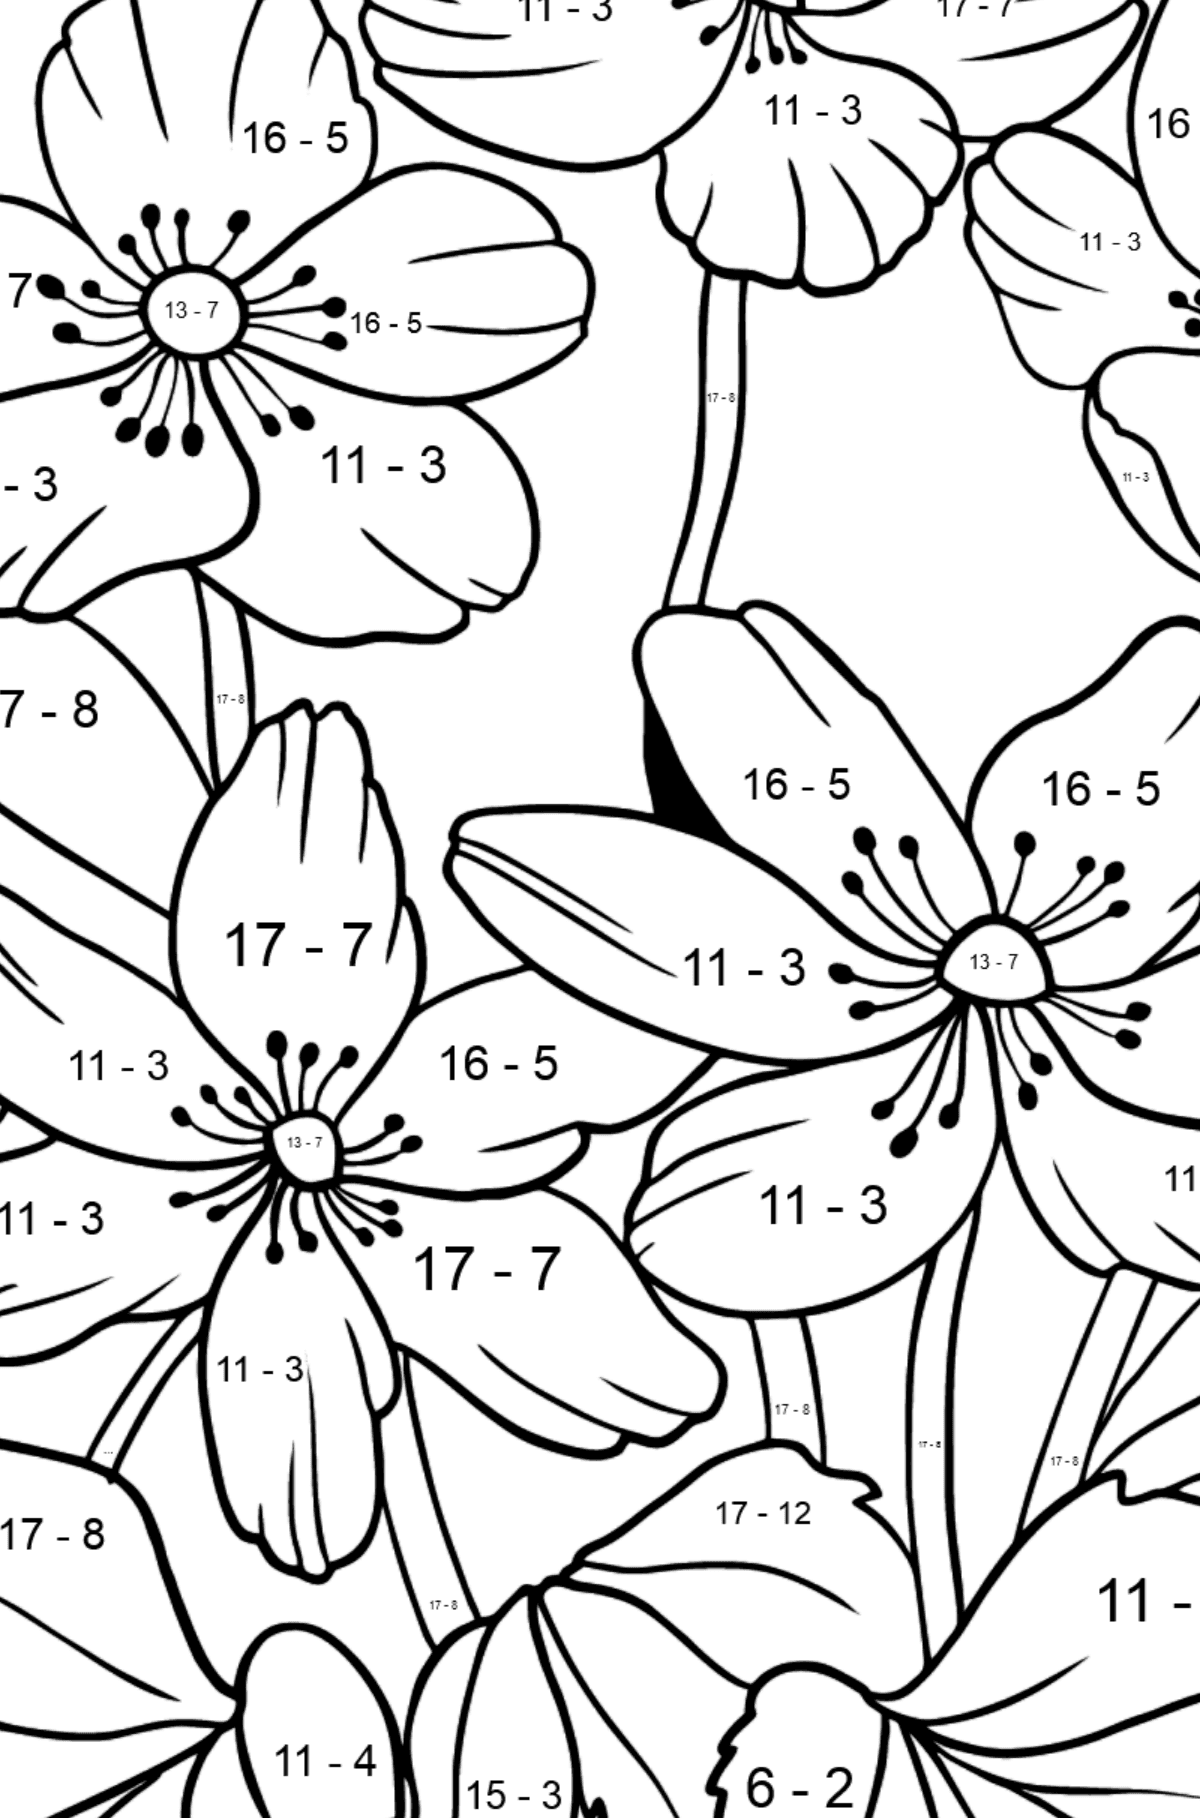 Flower Coloring Page - A Windflower with Yellow Petals - Math Coloring - Subtraction for Kids